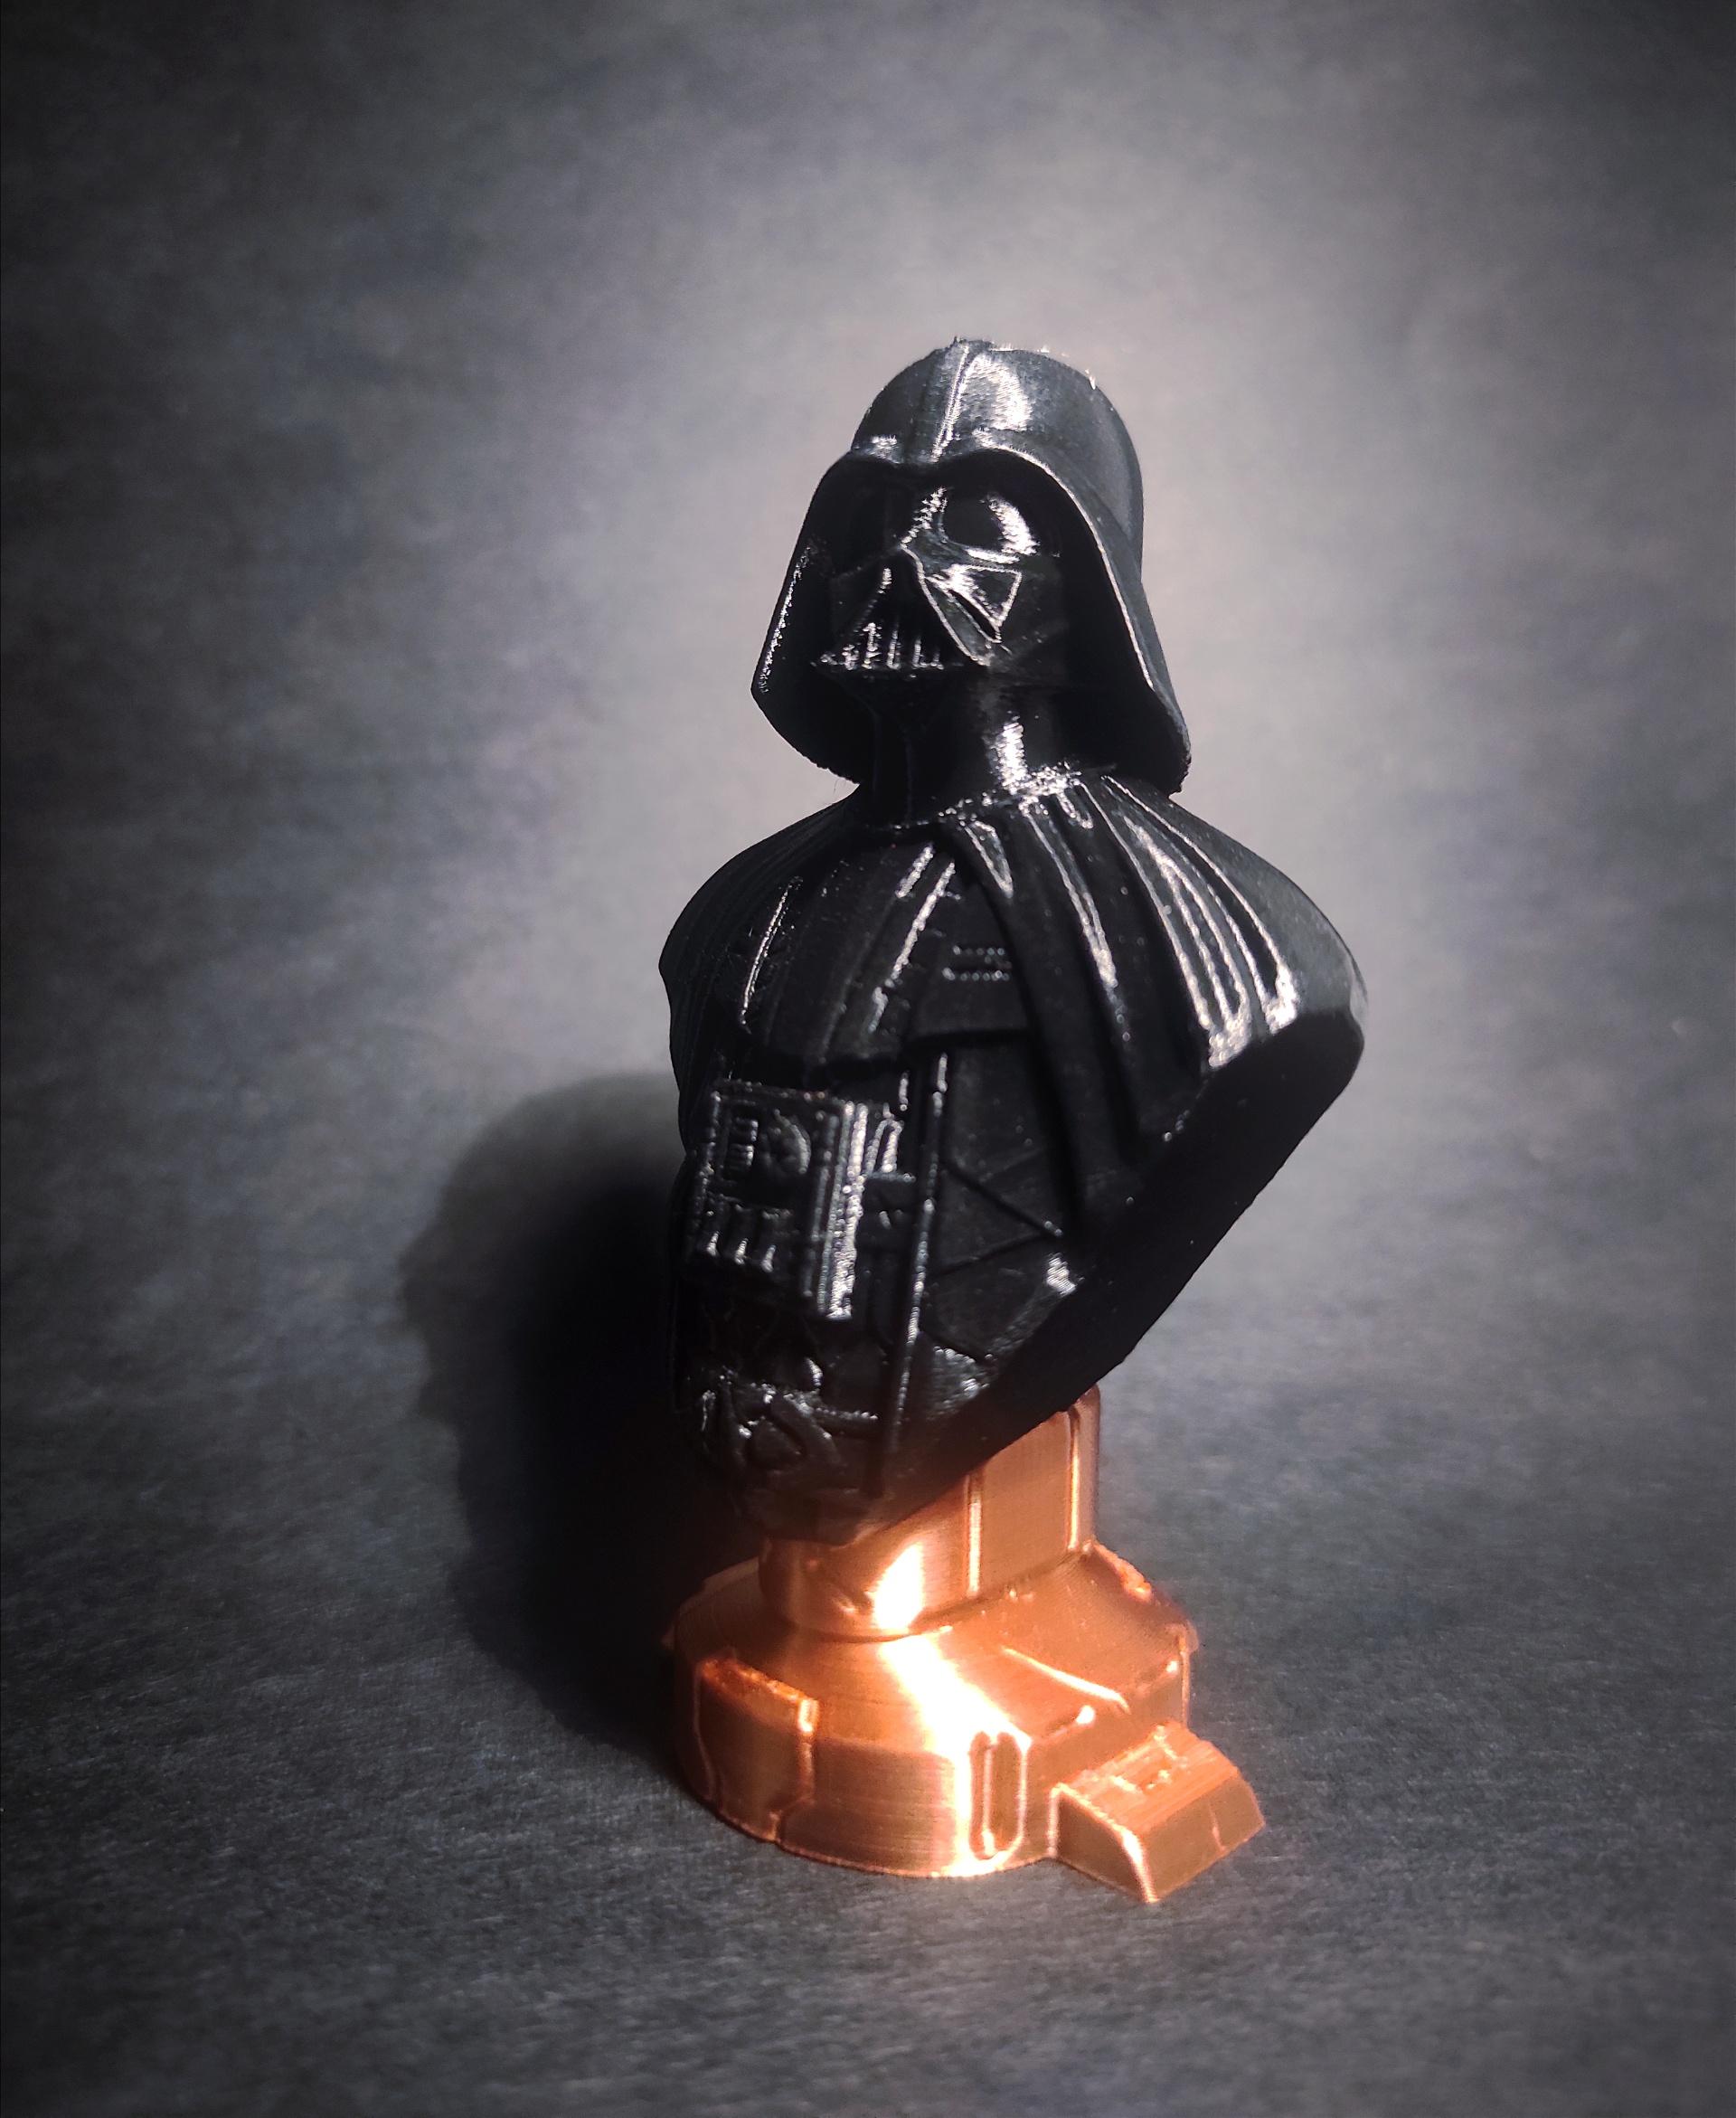 Darth Vader bust (fan art) - Great model!

Check my insta page 3Doodling for more makes!  - 3d model